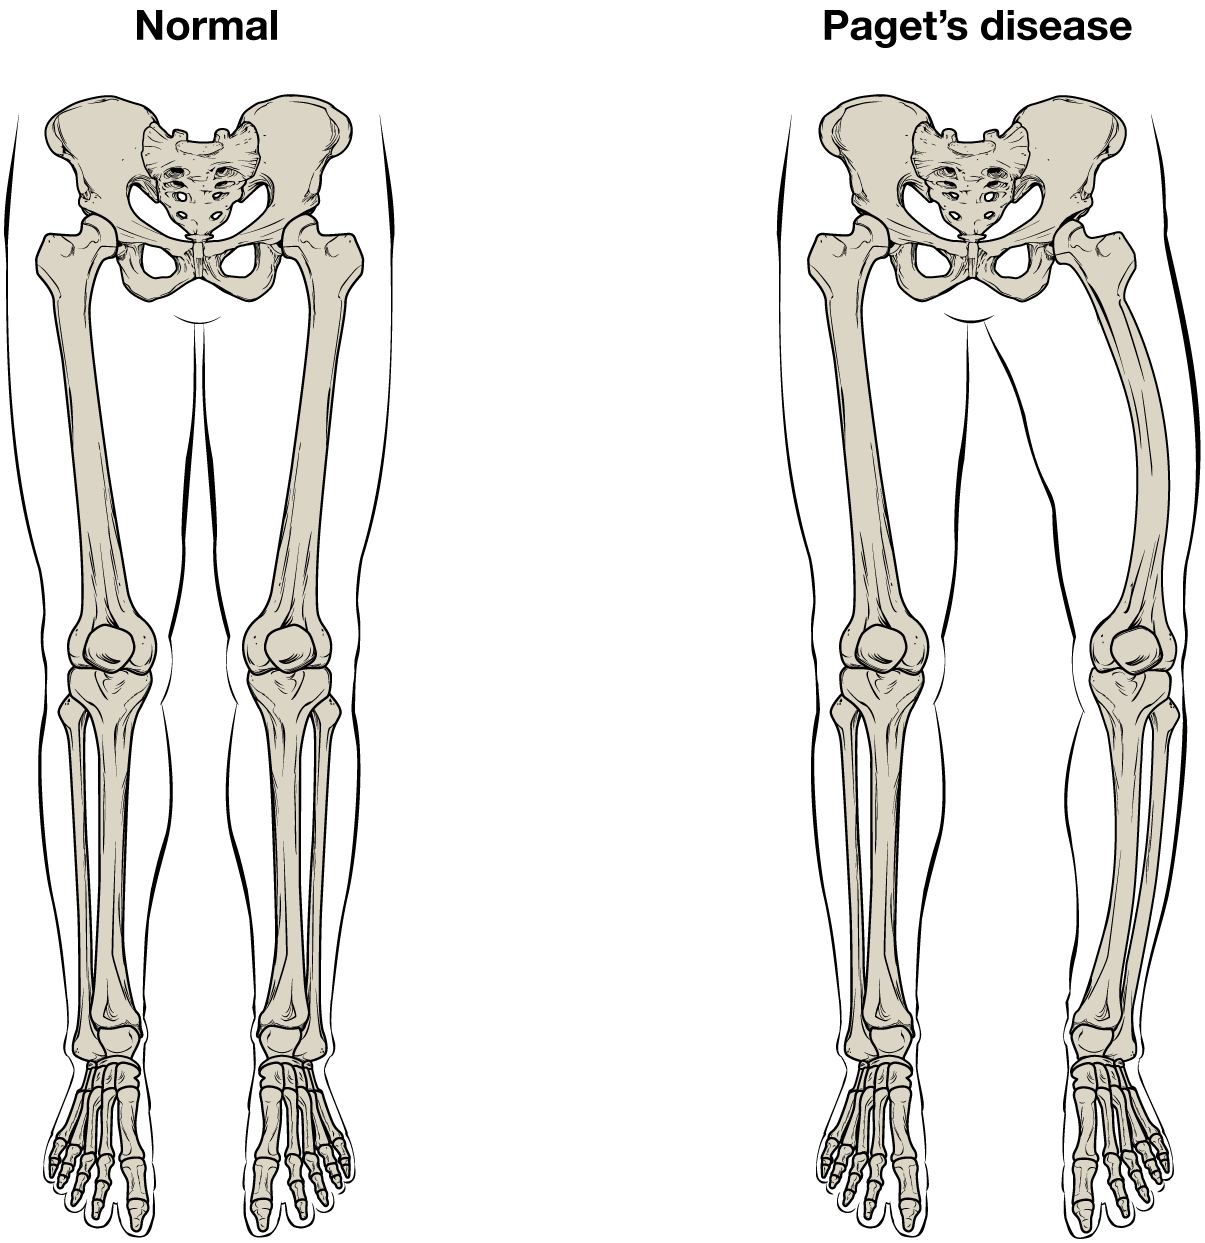 This illustration shows the normal skeletal structure of the legs from